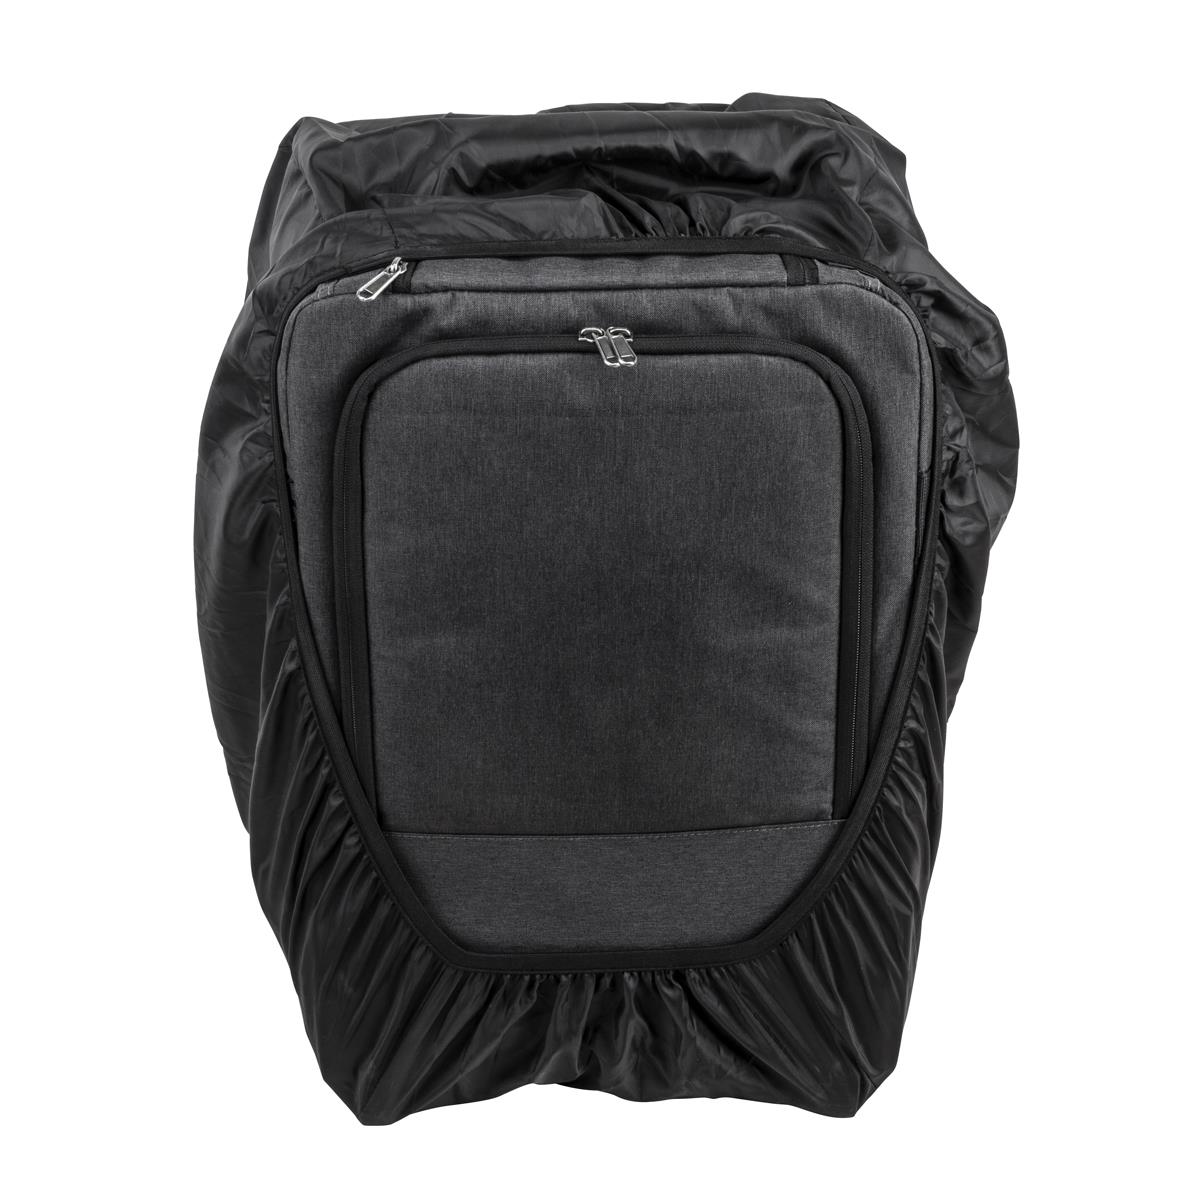 Flashpoint Rolling Carrying Case for the XPLOR Power 1200 Pro (Godox ...